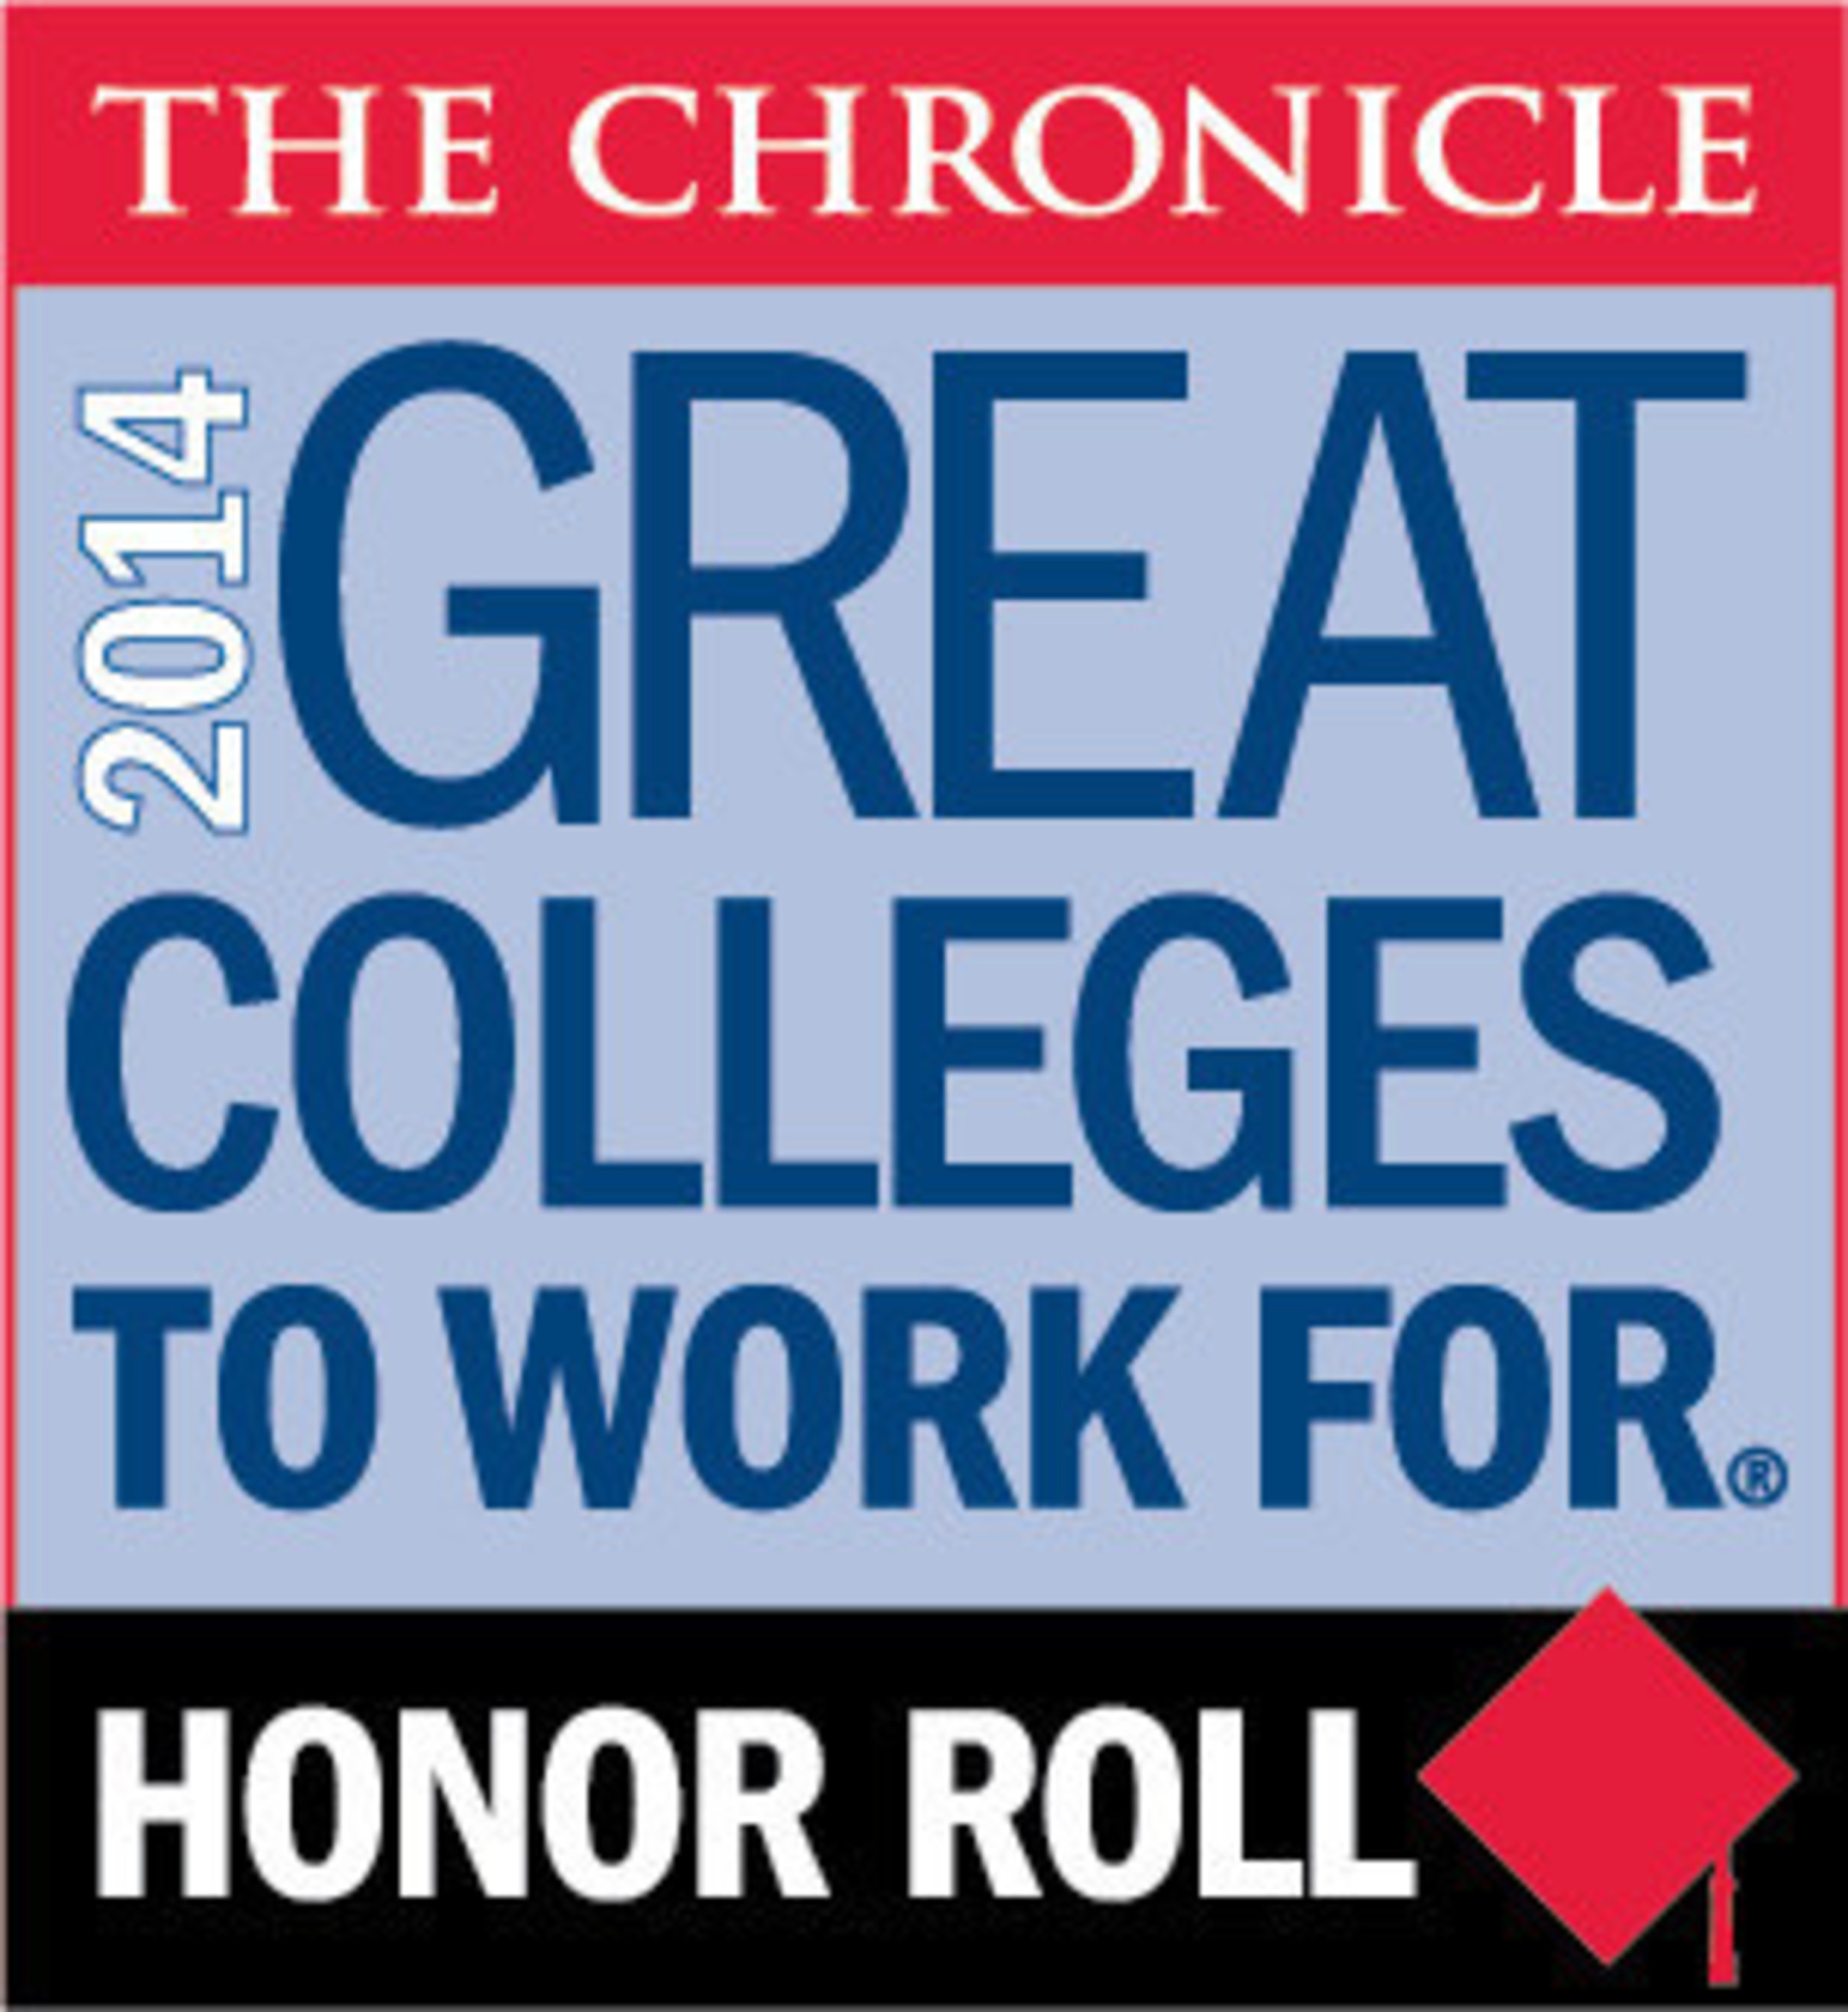 2014 Great Colleges to Work For Honor Roll (PRNewsFoto/Endicott College)